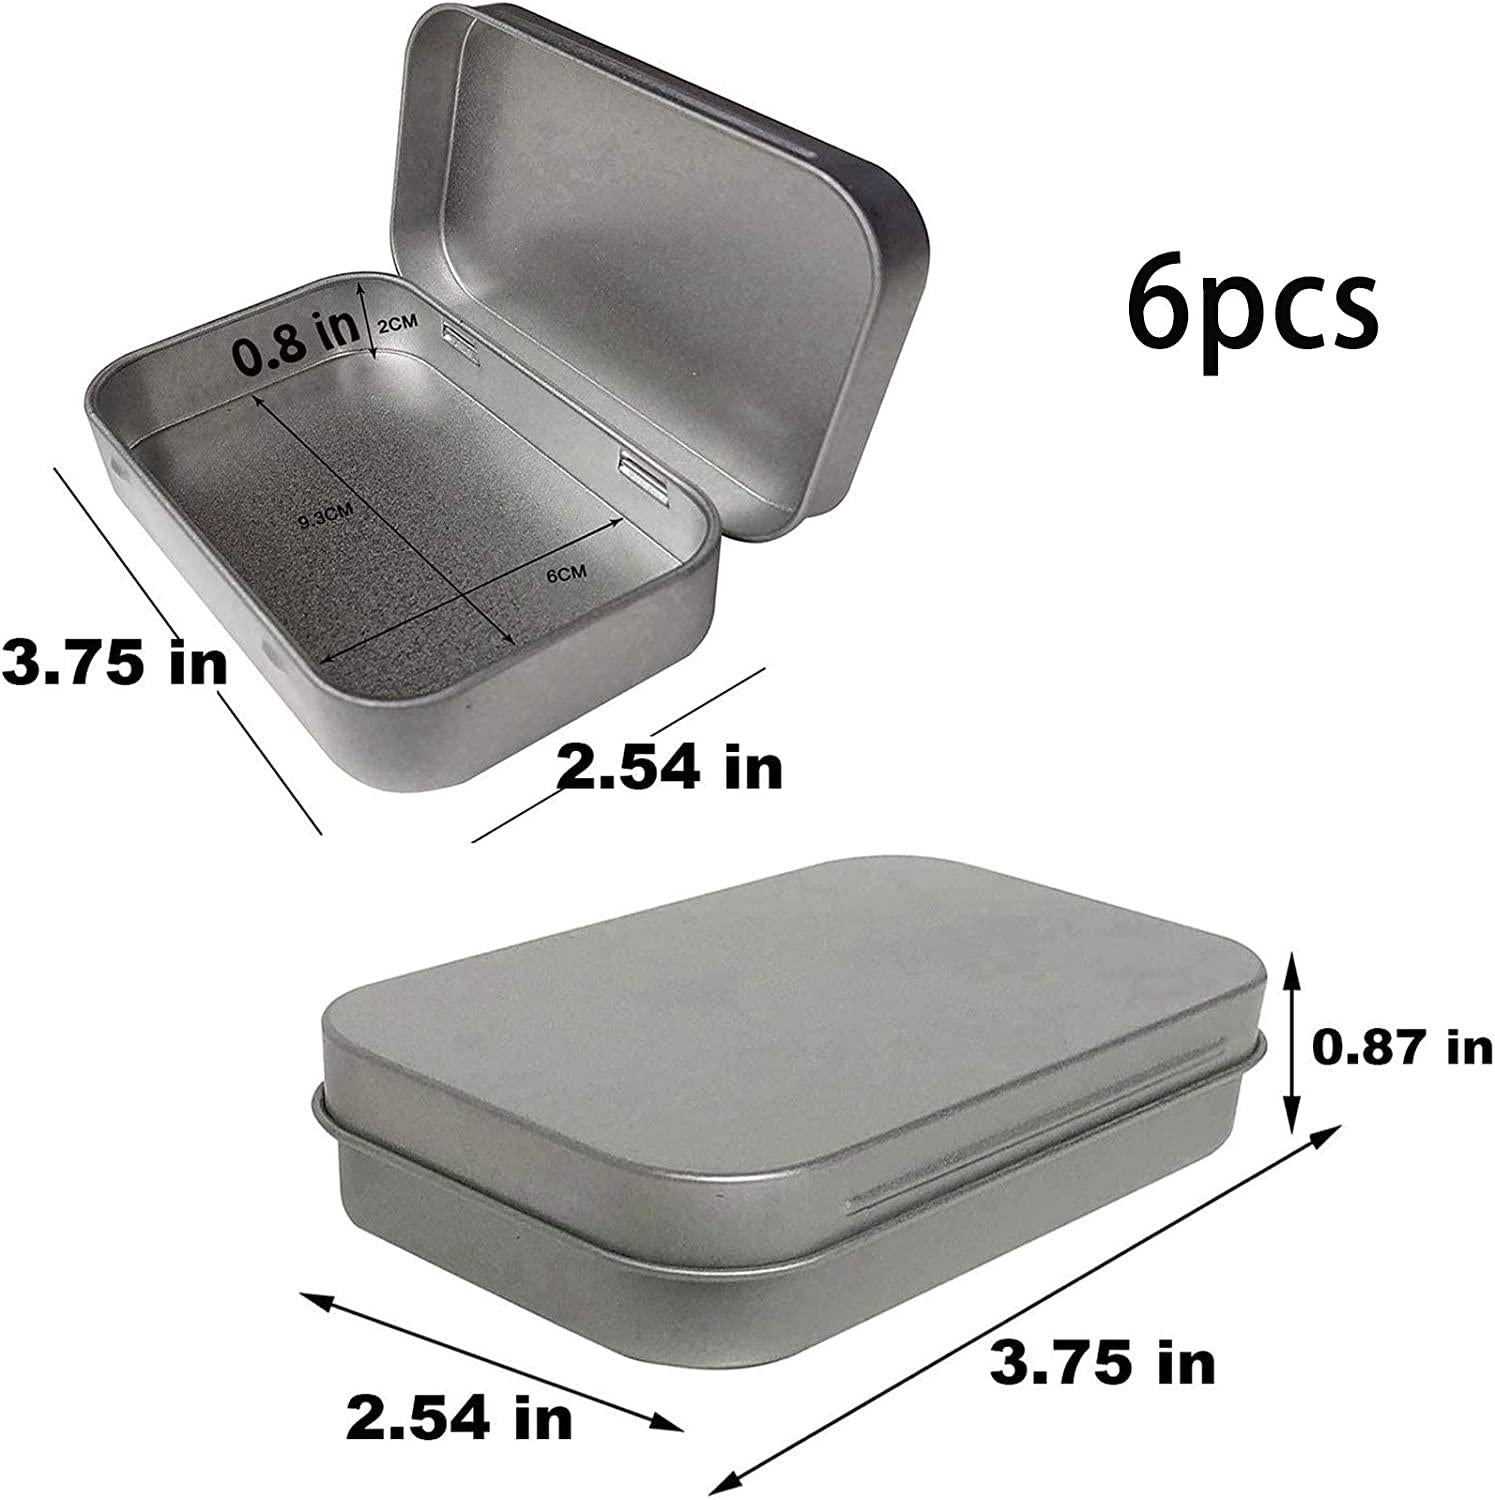 LANGING, Metal Hinged Tins Box Containers Mini Portable Small Storage Containers 6pcs